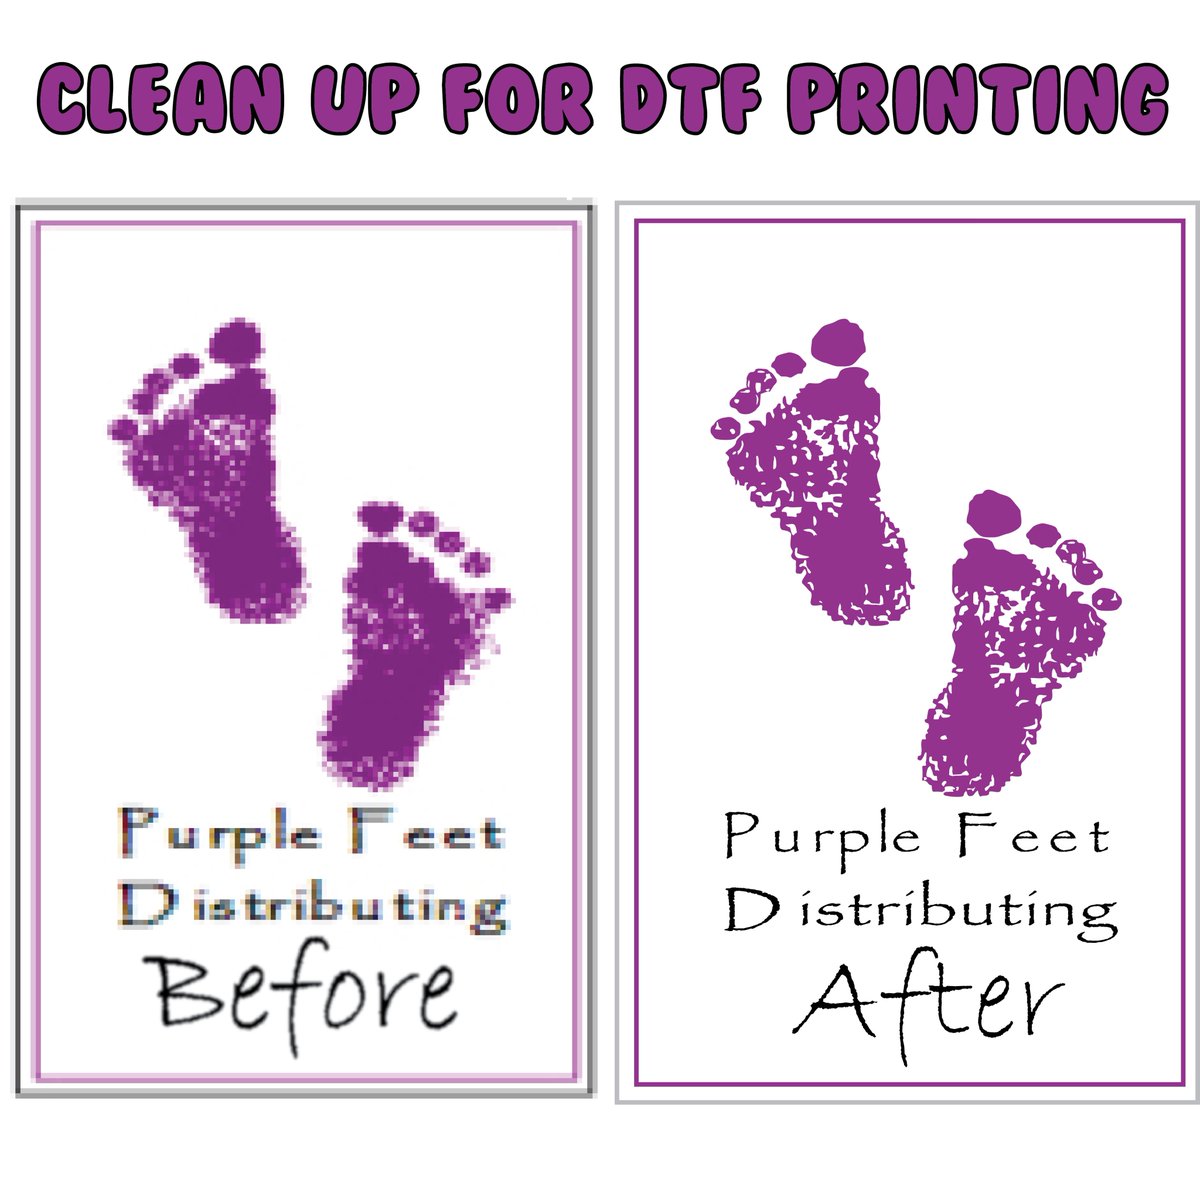 We now offer art clean-up for DTF Printing!

Send us your blurry images, we clean them up for your printing purposes.

copyartwork.com/vector-artwork…
#dtftransfers #dtf #dtfprint #dtfprinter #dtfprinting #directtofilm #directtofilmprinting #directtofilmprinting #directtofilmtransfers